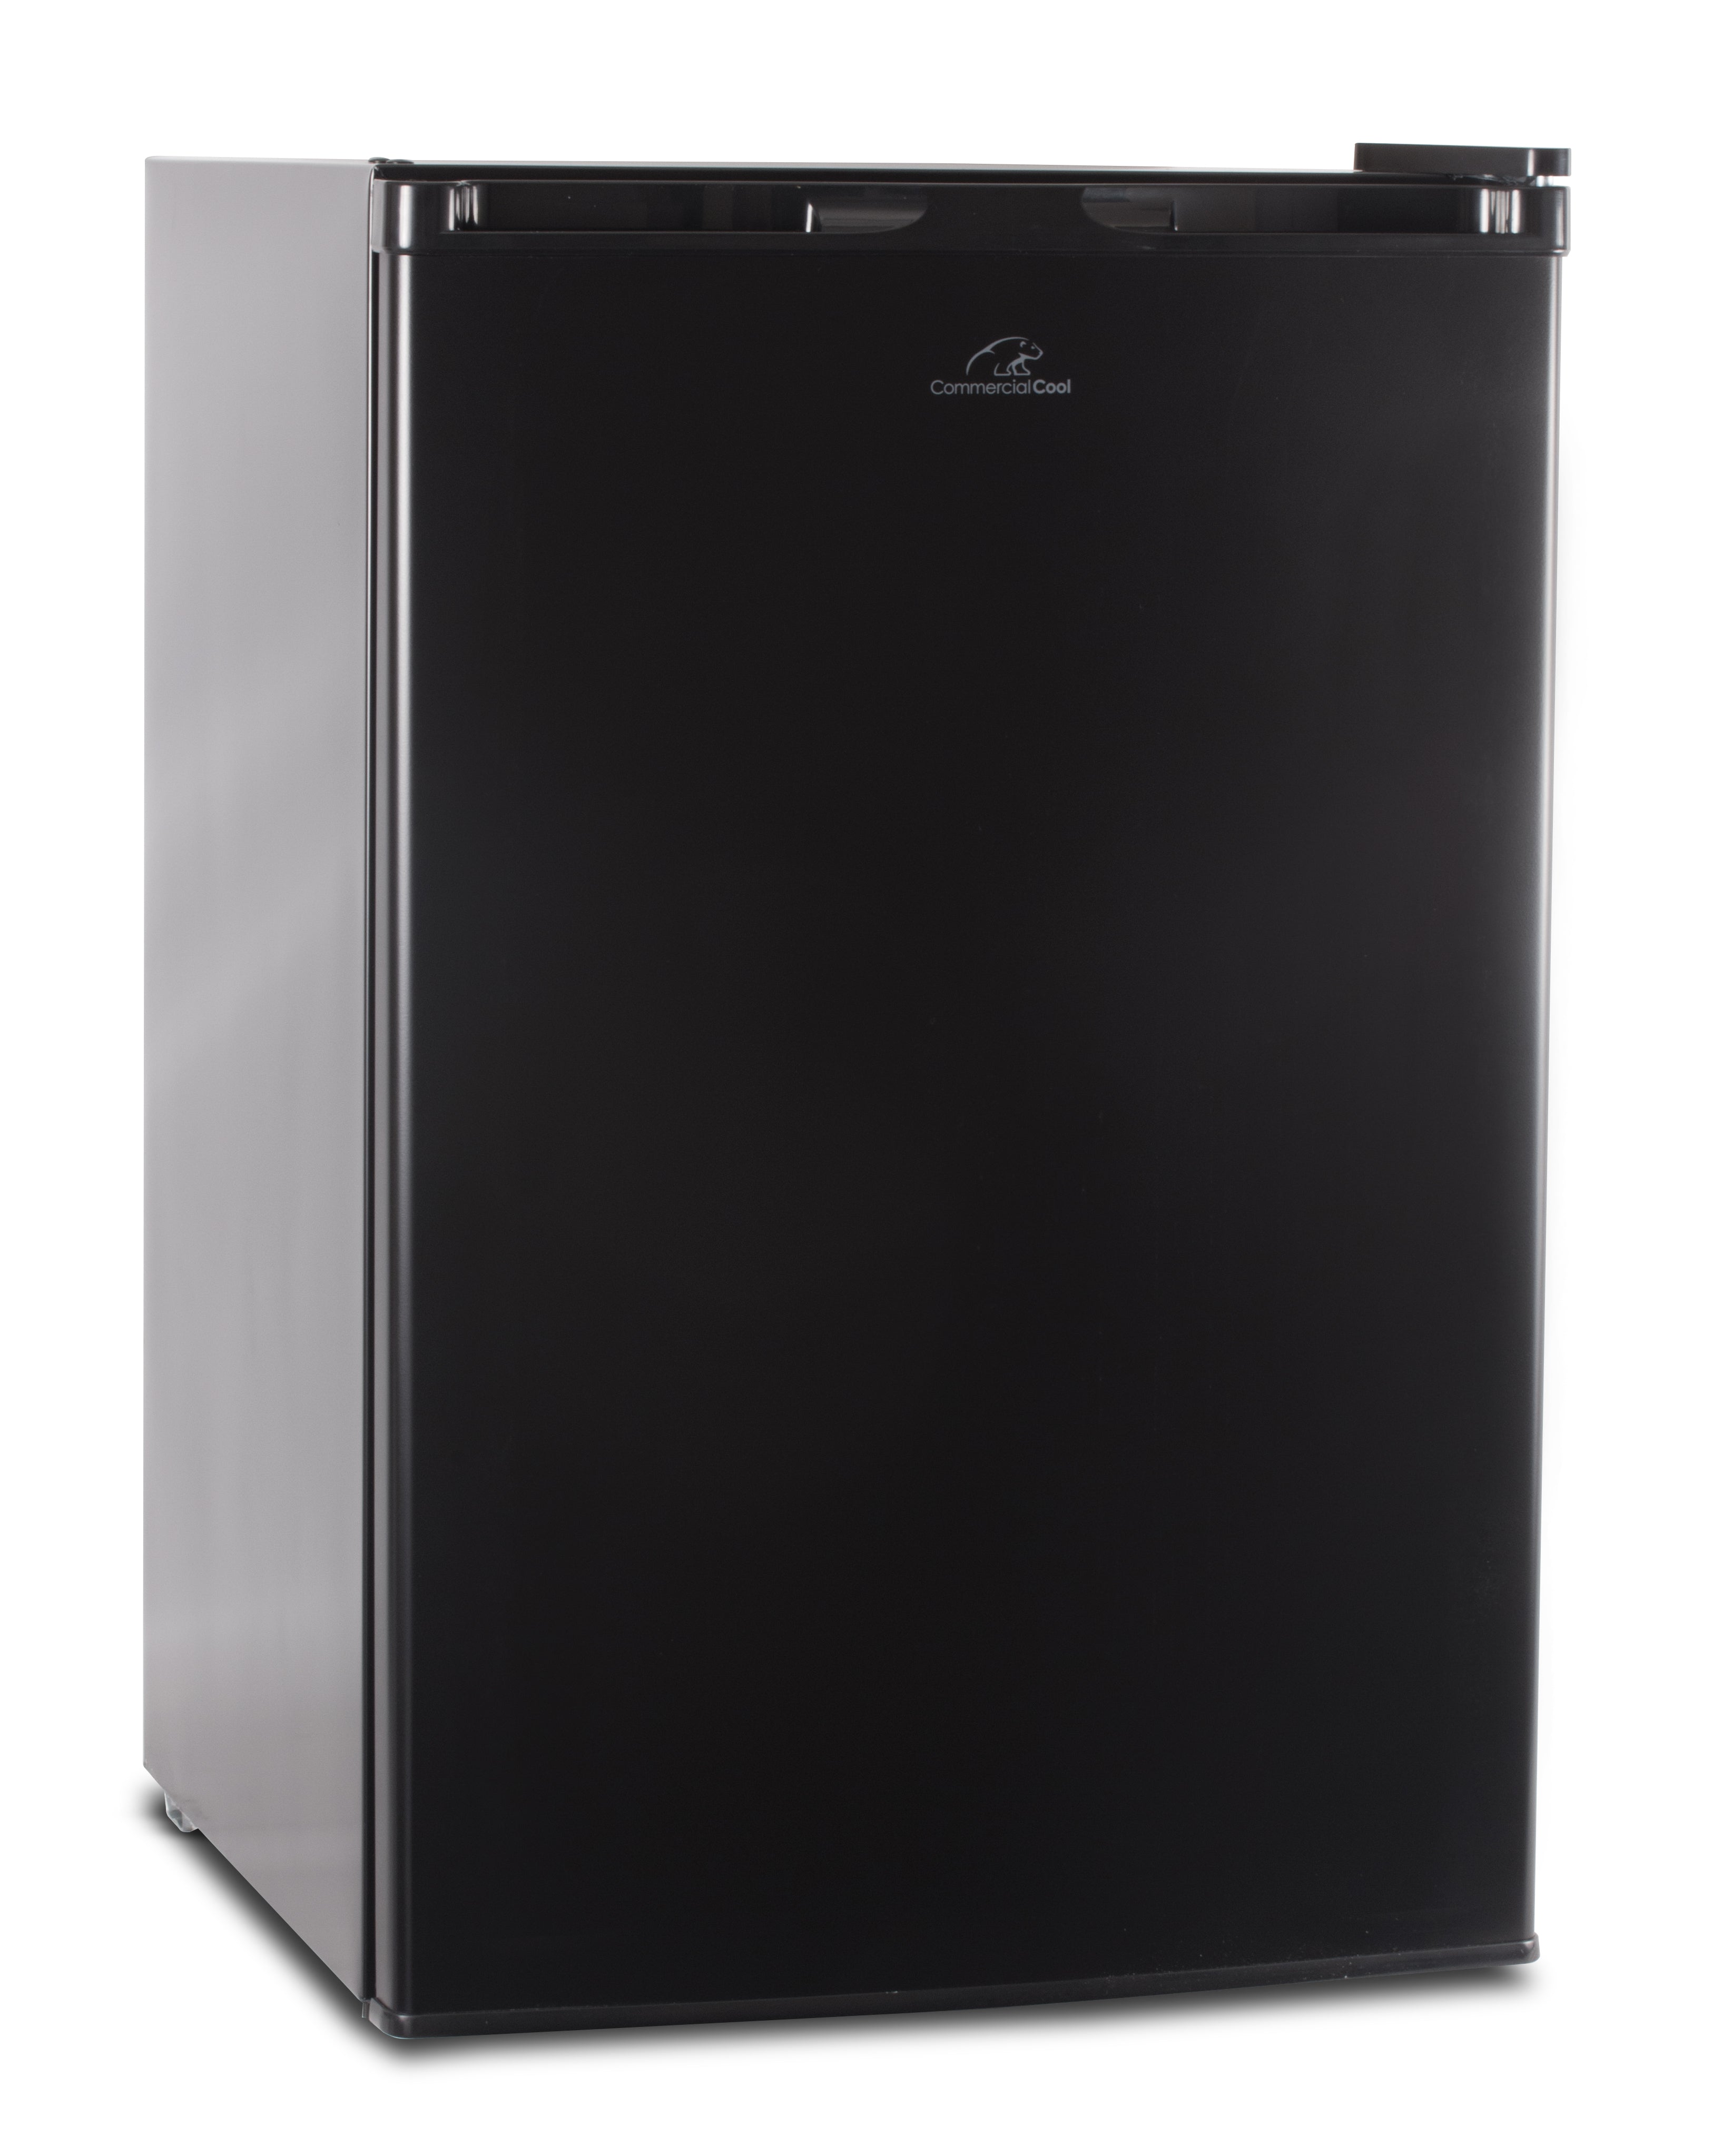 COMMERCIAL COOL Refrigerator and Freezer 4.5 Cu. Ft., Black